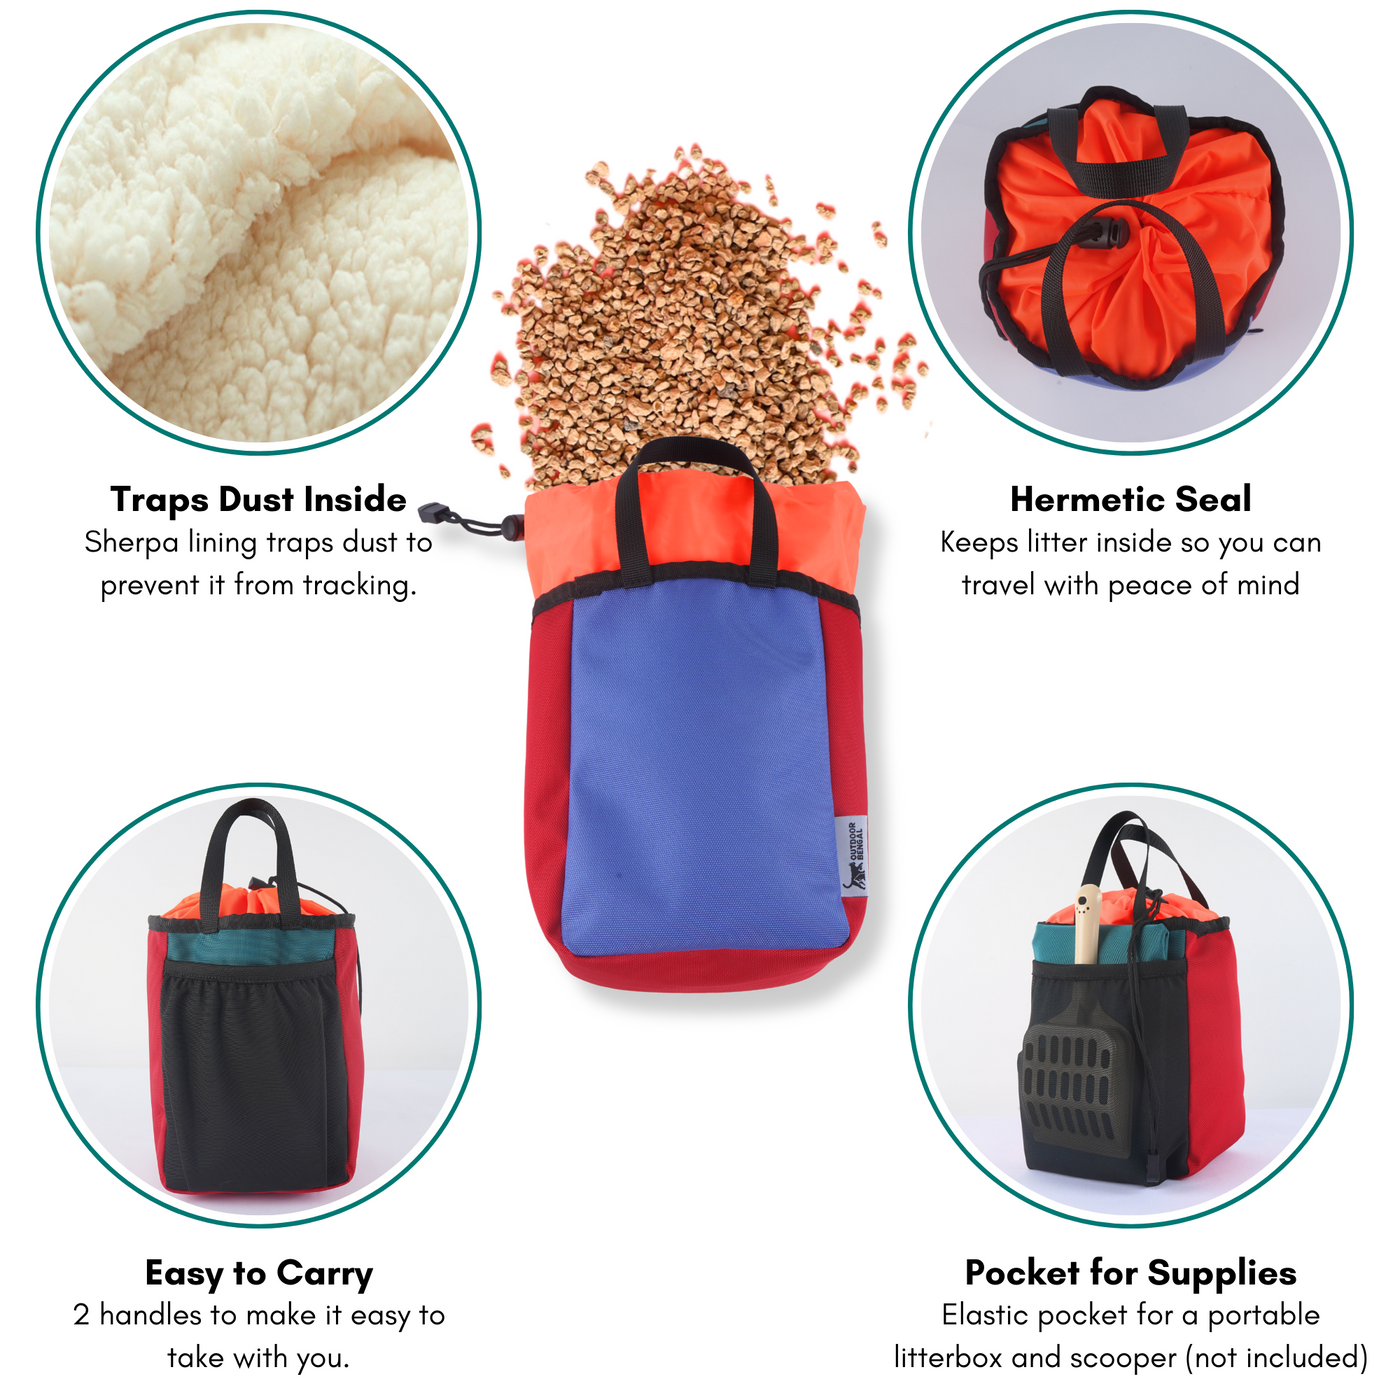 Portable Litterbox for Travel